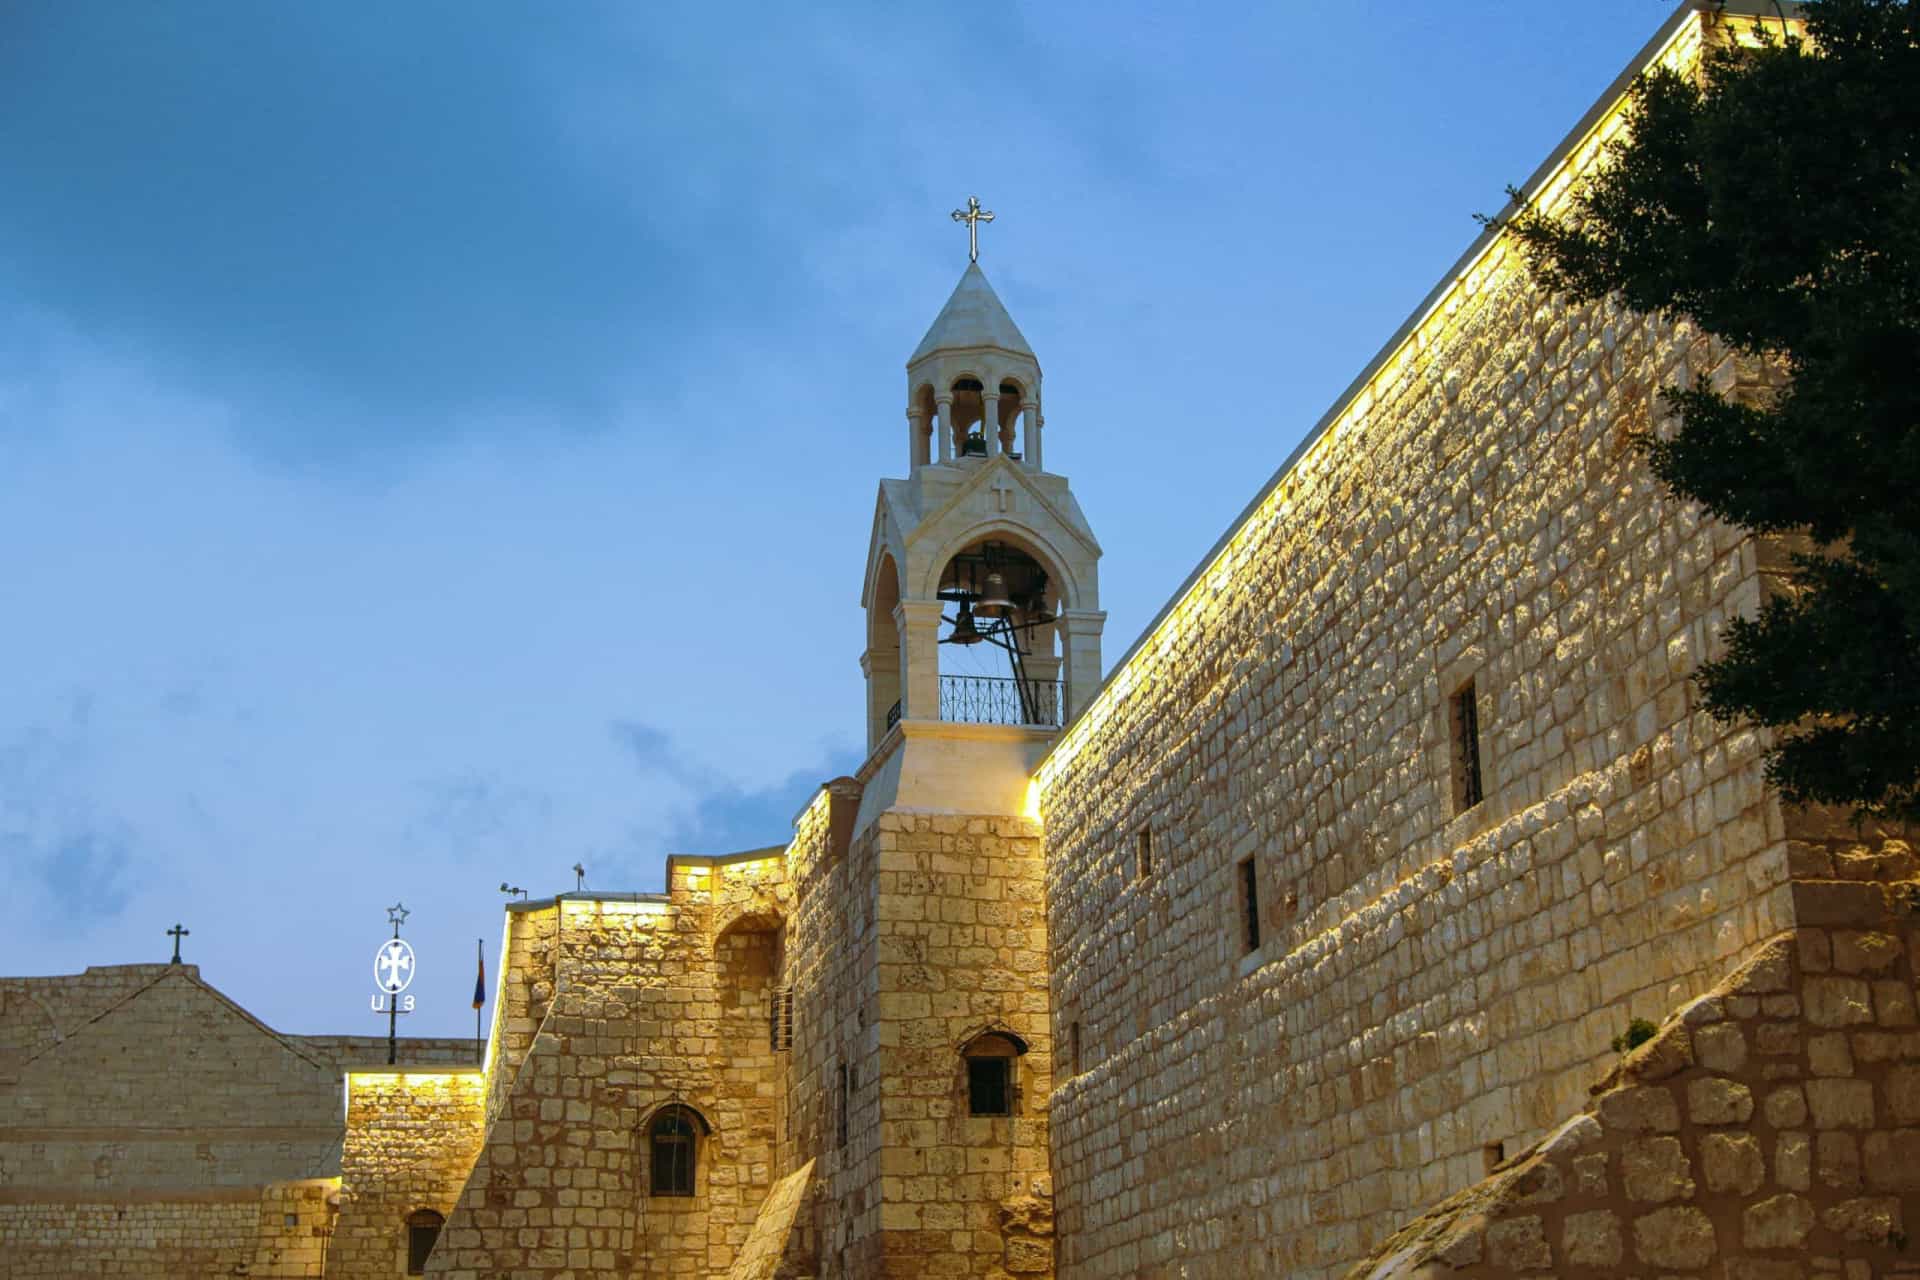 <p>One of the most revered sites in Christianity, the Church of the Nativity in <a href="https://www.starsinsider.com/lifestyle/492058/fascinating-facts-about-bethlehem" rel="noopener">Bethlehem</a> is said to be the birthplace of Jesus.</p>